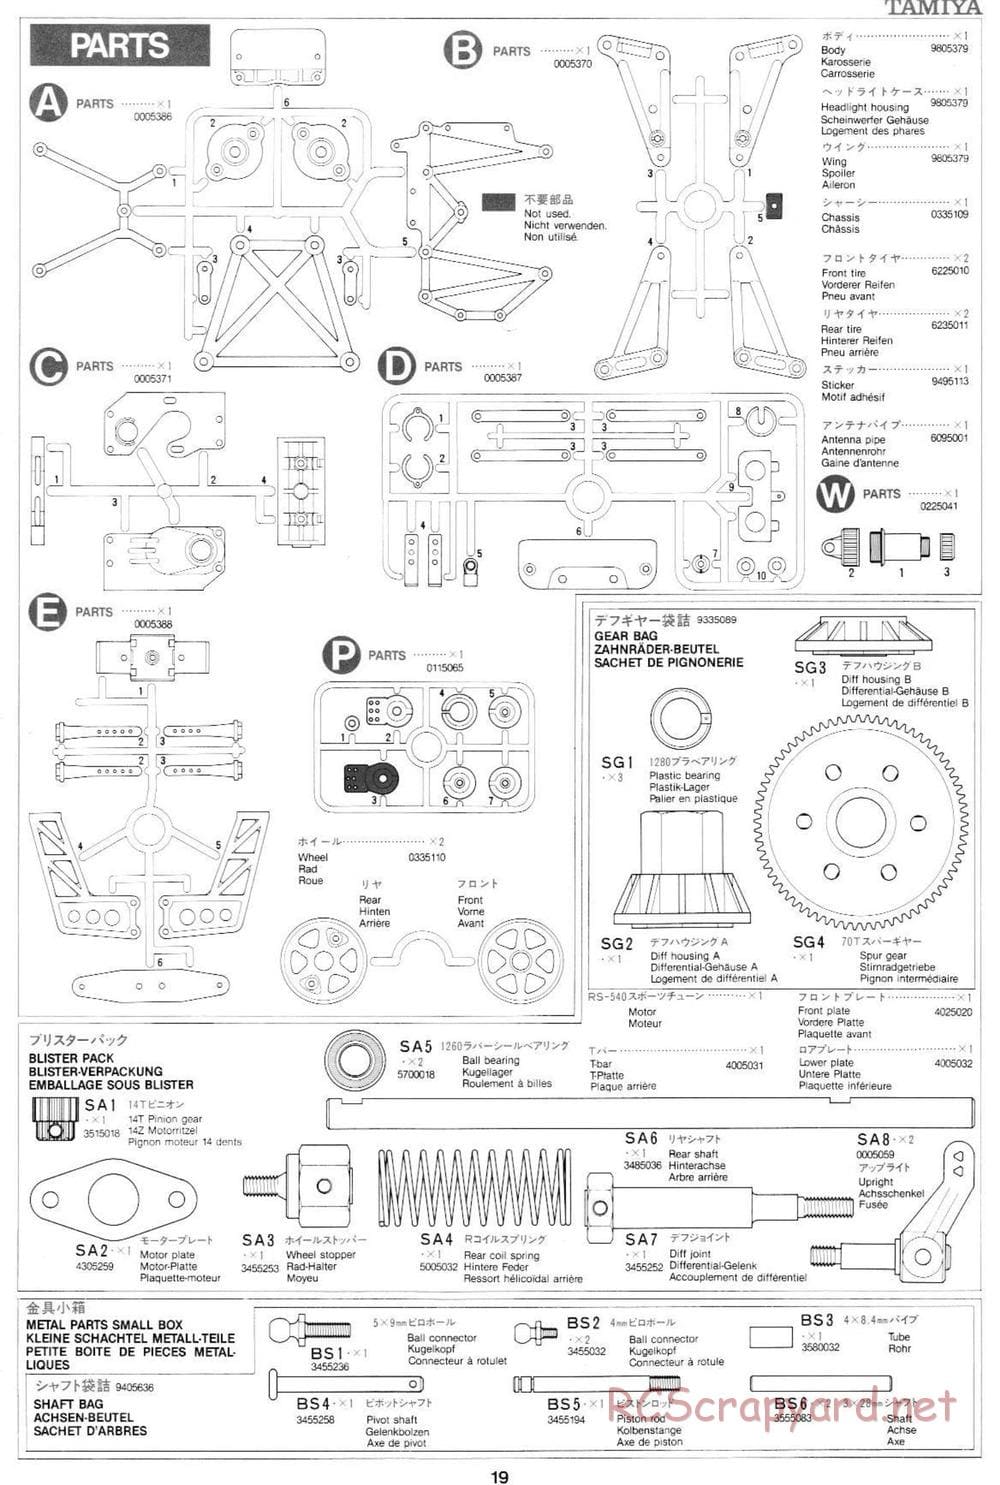 Tamiya - Mercedes-Benz C11 - Group-C Chassis - Manual - Page 19